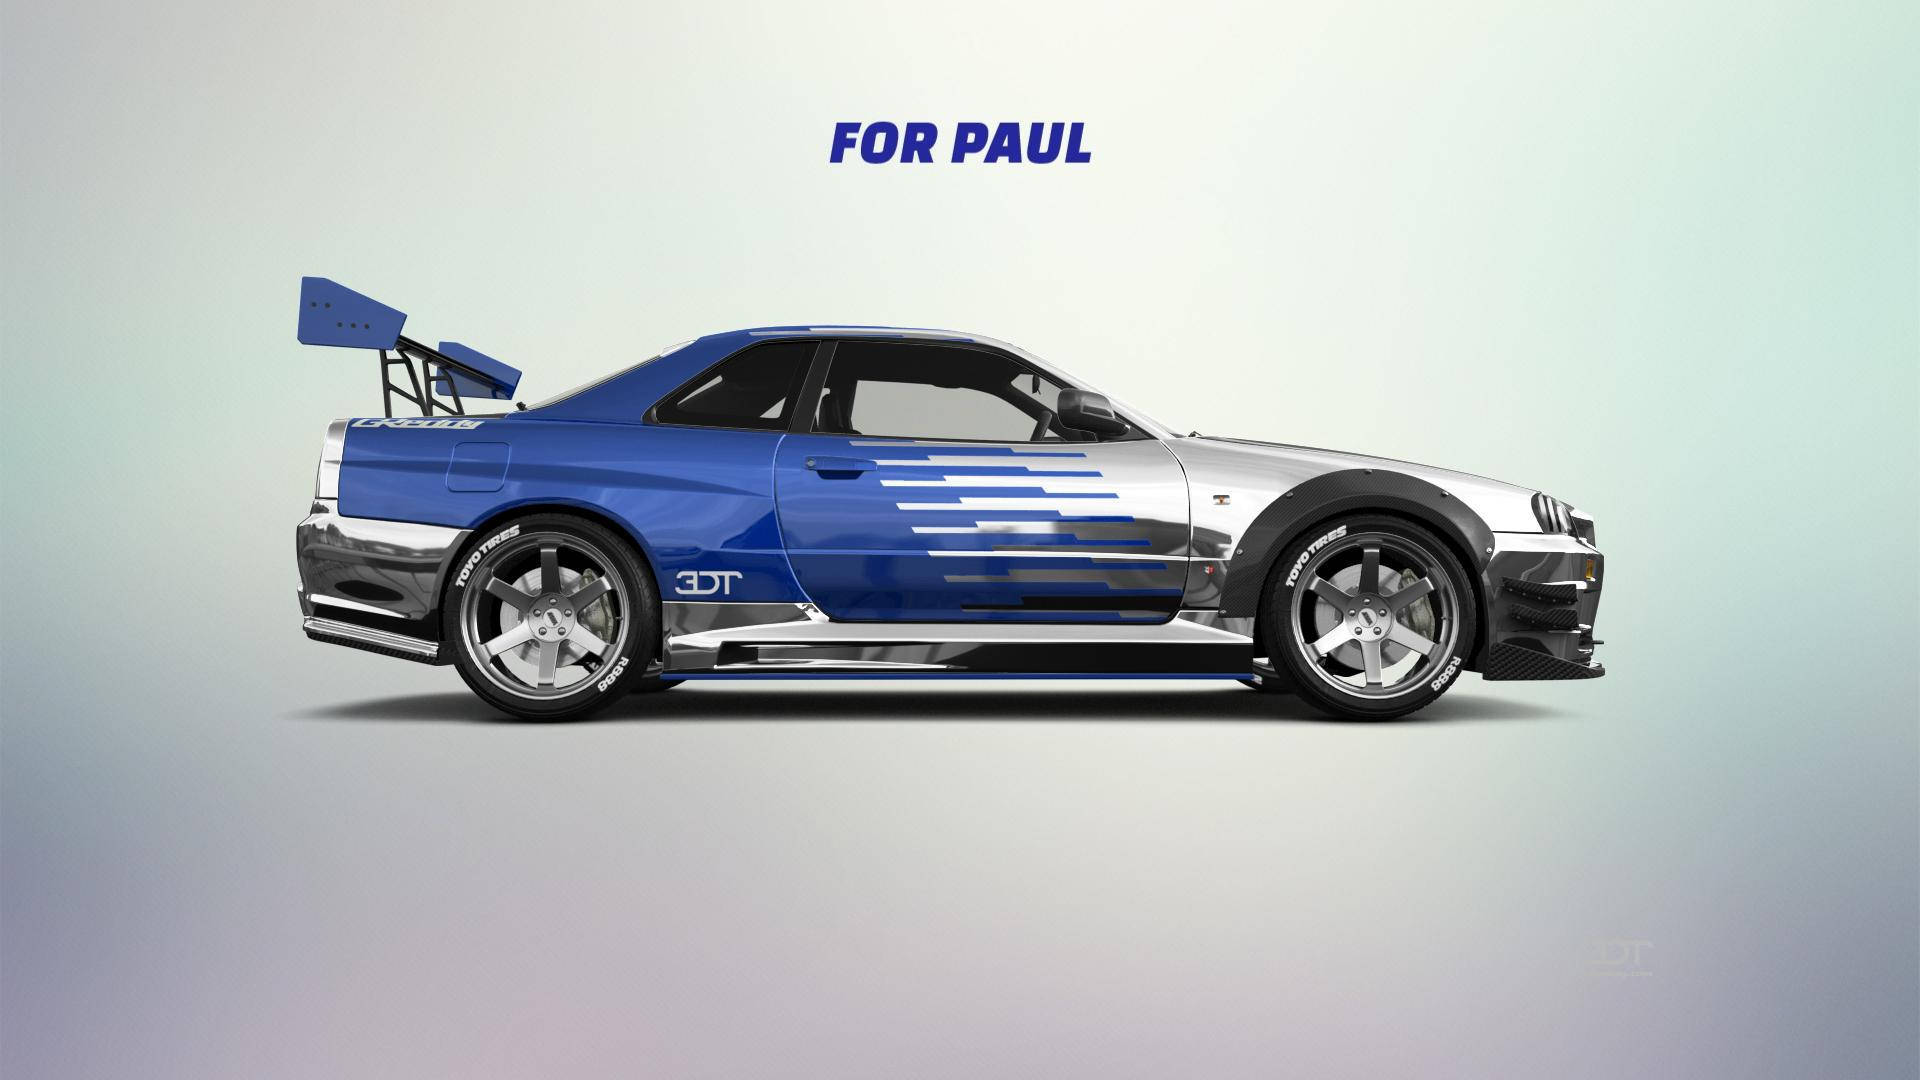 Paulwalker Und Sein Auto - Fast And Furious Wallpaper